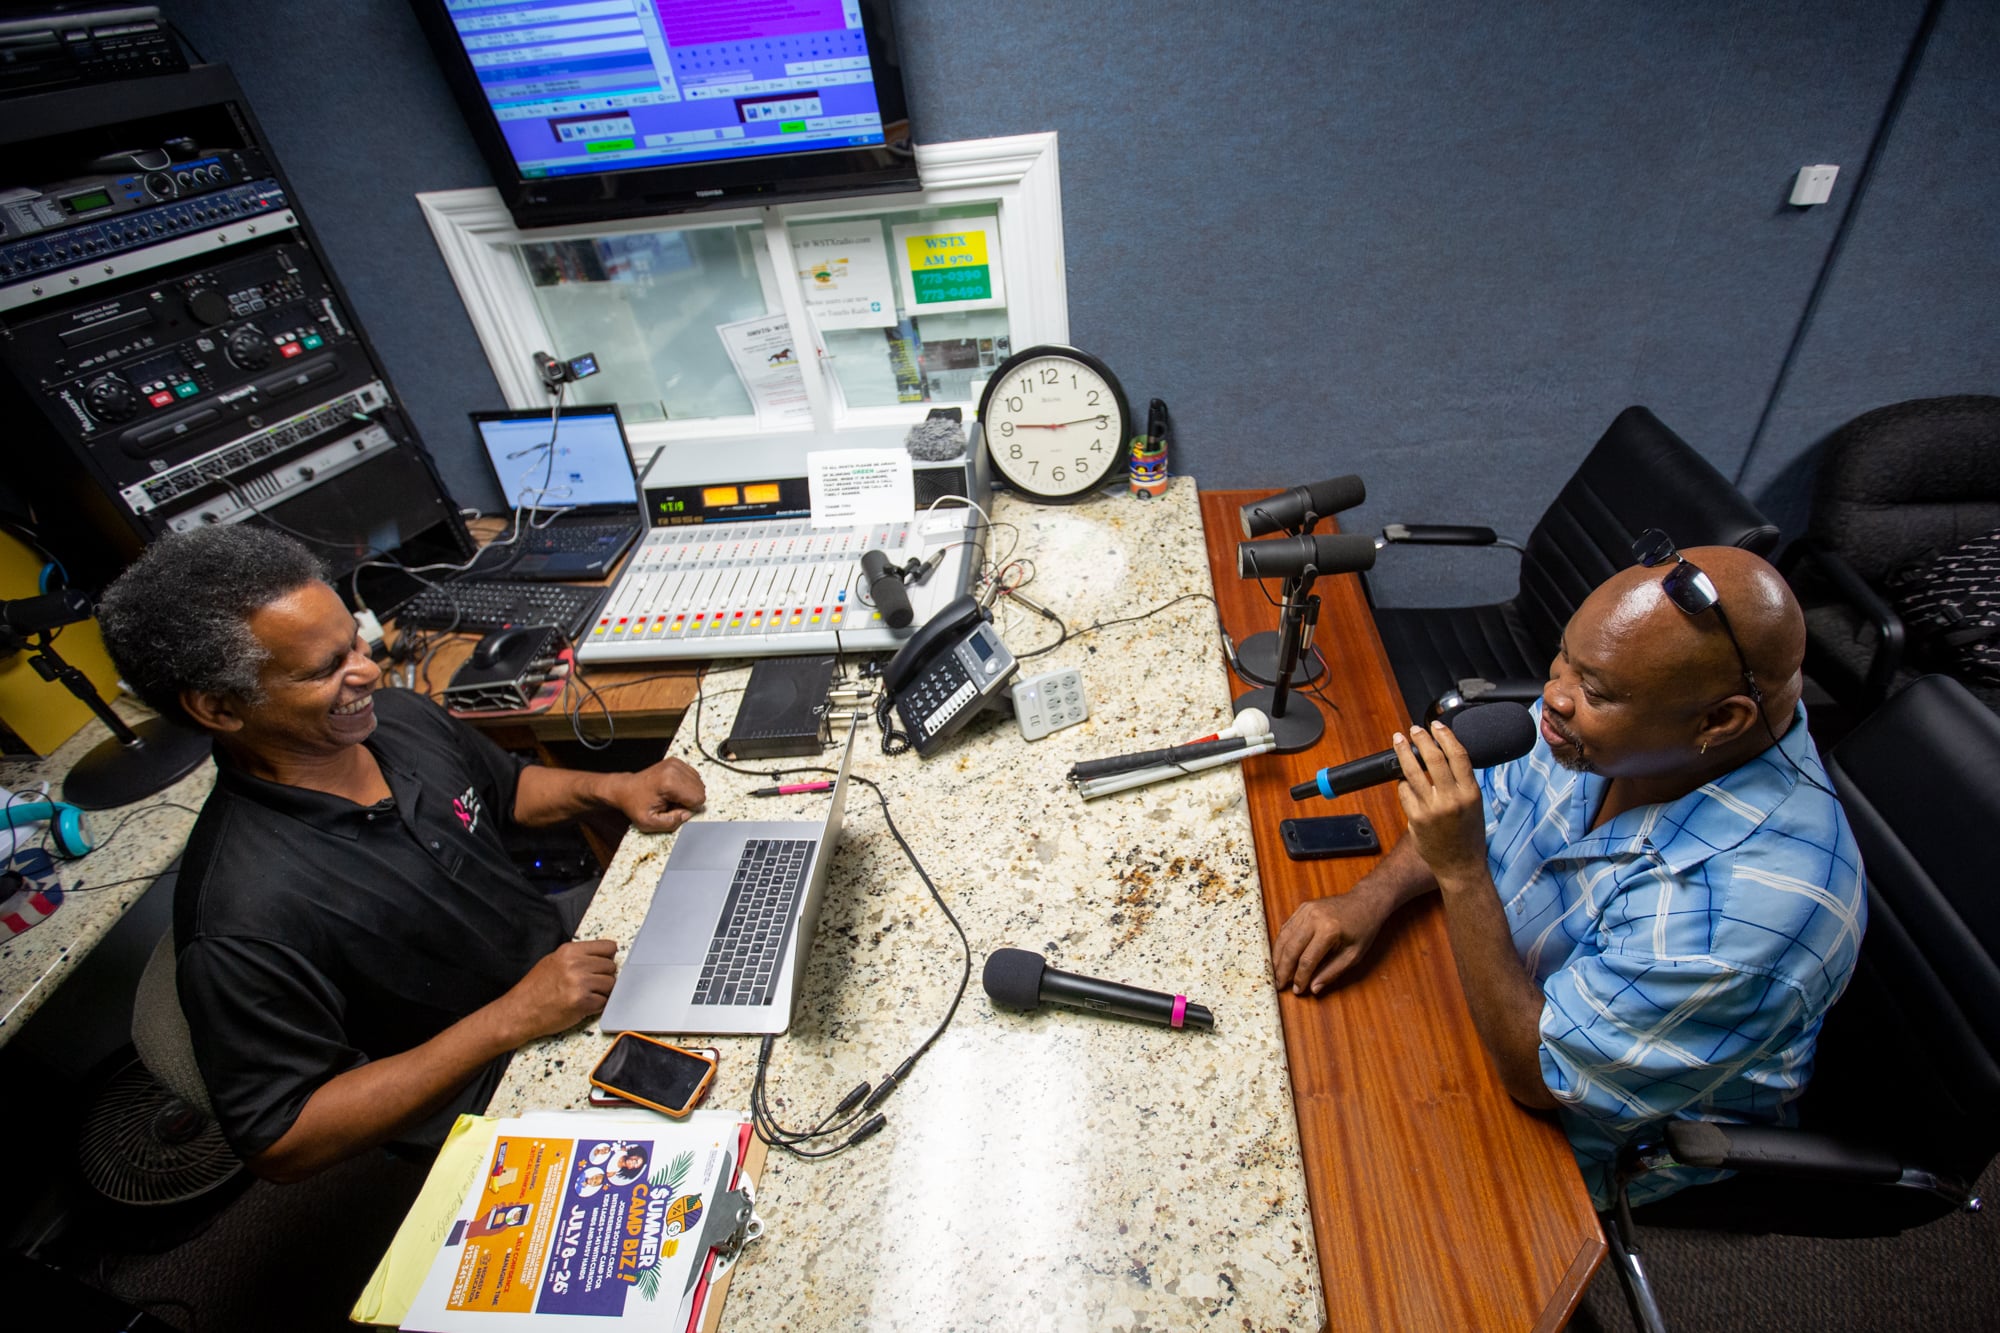 Gerard Evelyn (right) speaks with Doug Canton of WSTX radio on a show called “Reflections” on St. Croix. During the 2017 hurricane season, Evelyn said, radio was invaluable for communication. (Anya Magnuson/News21)